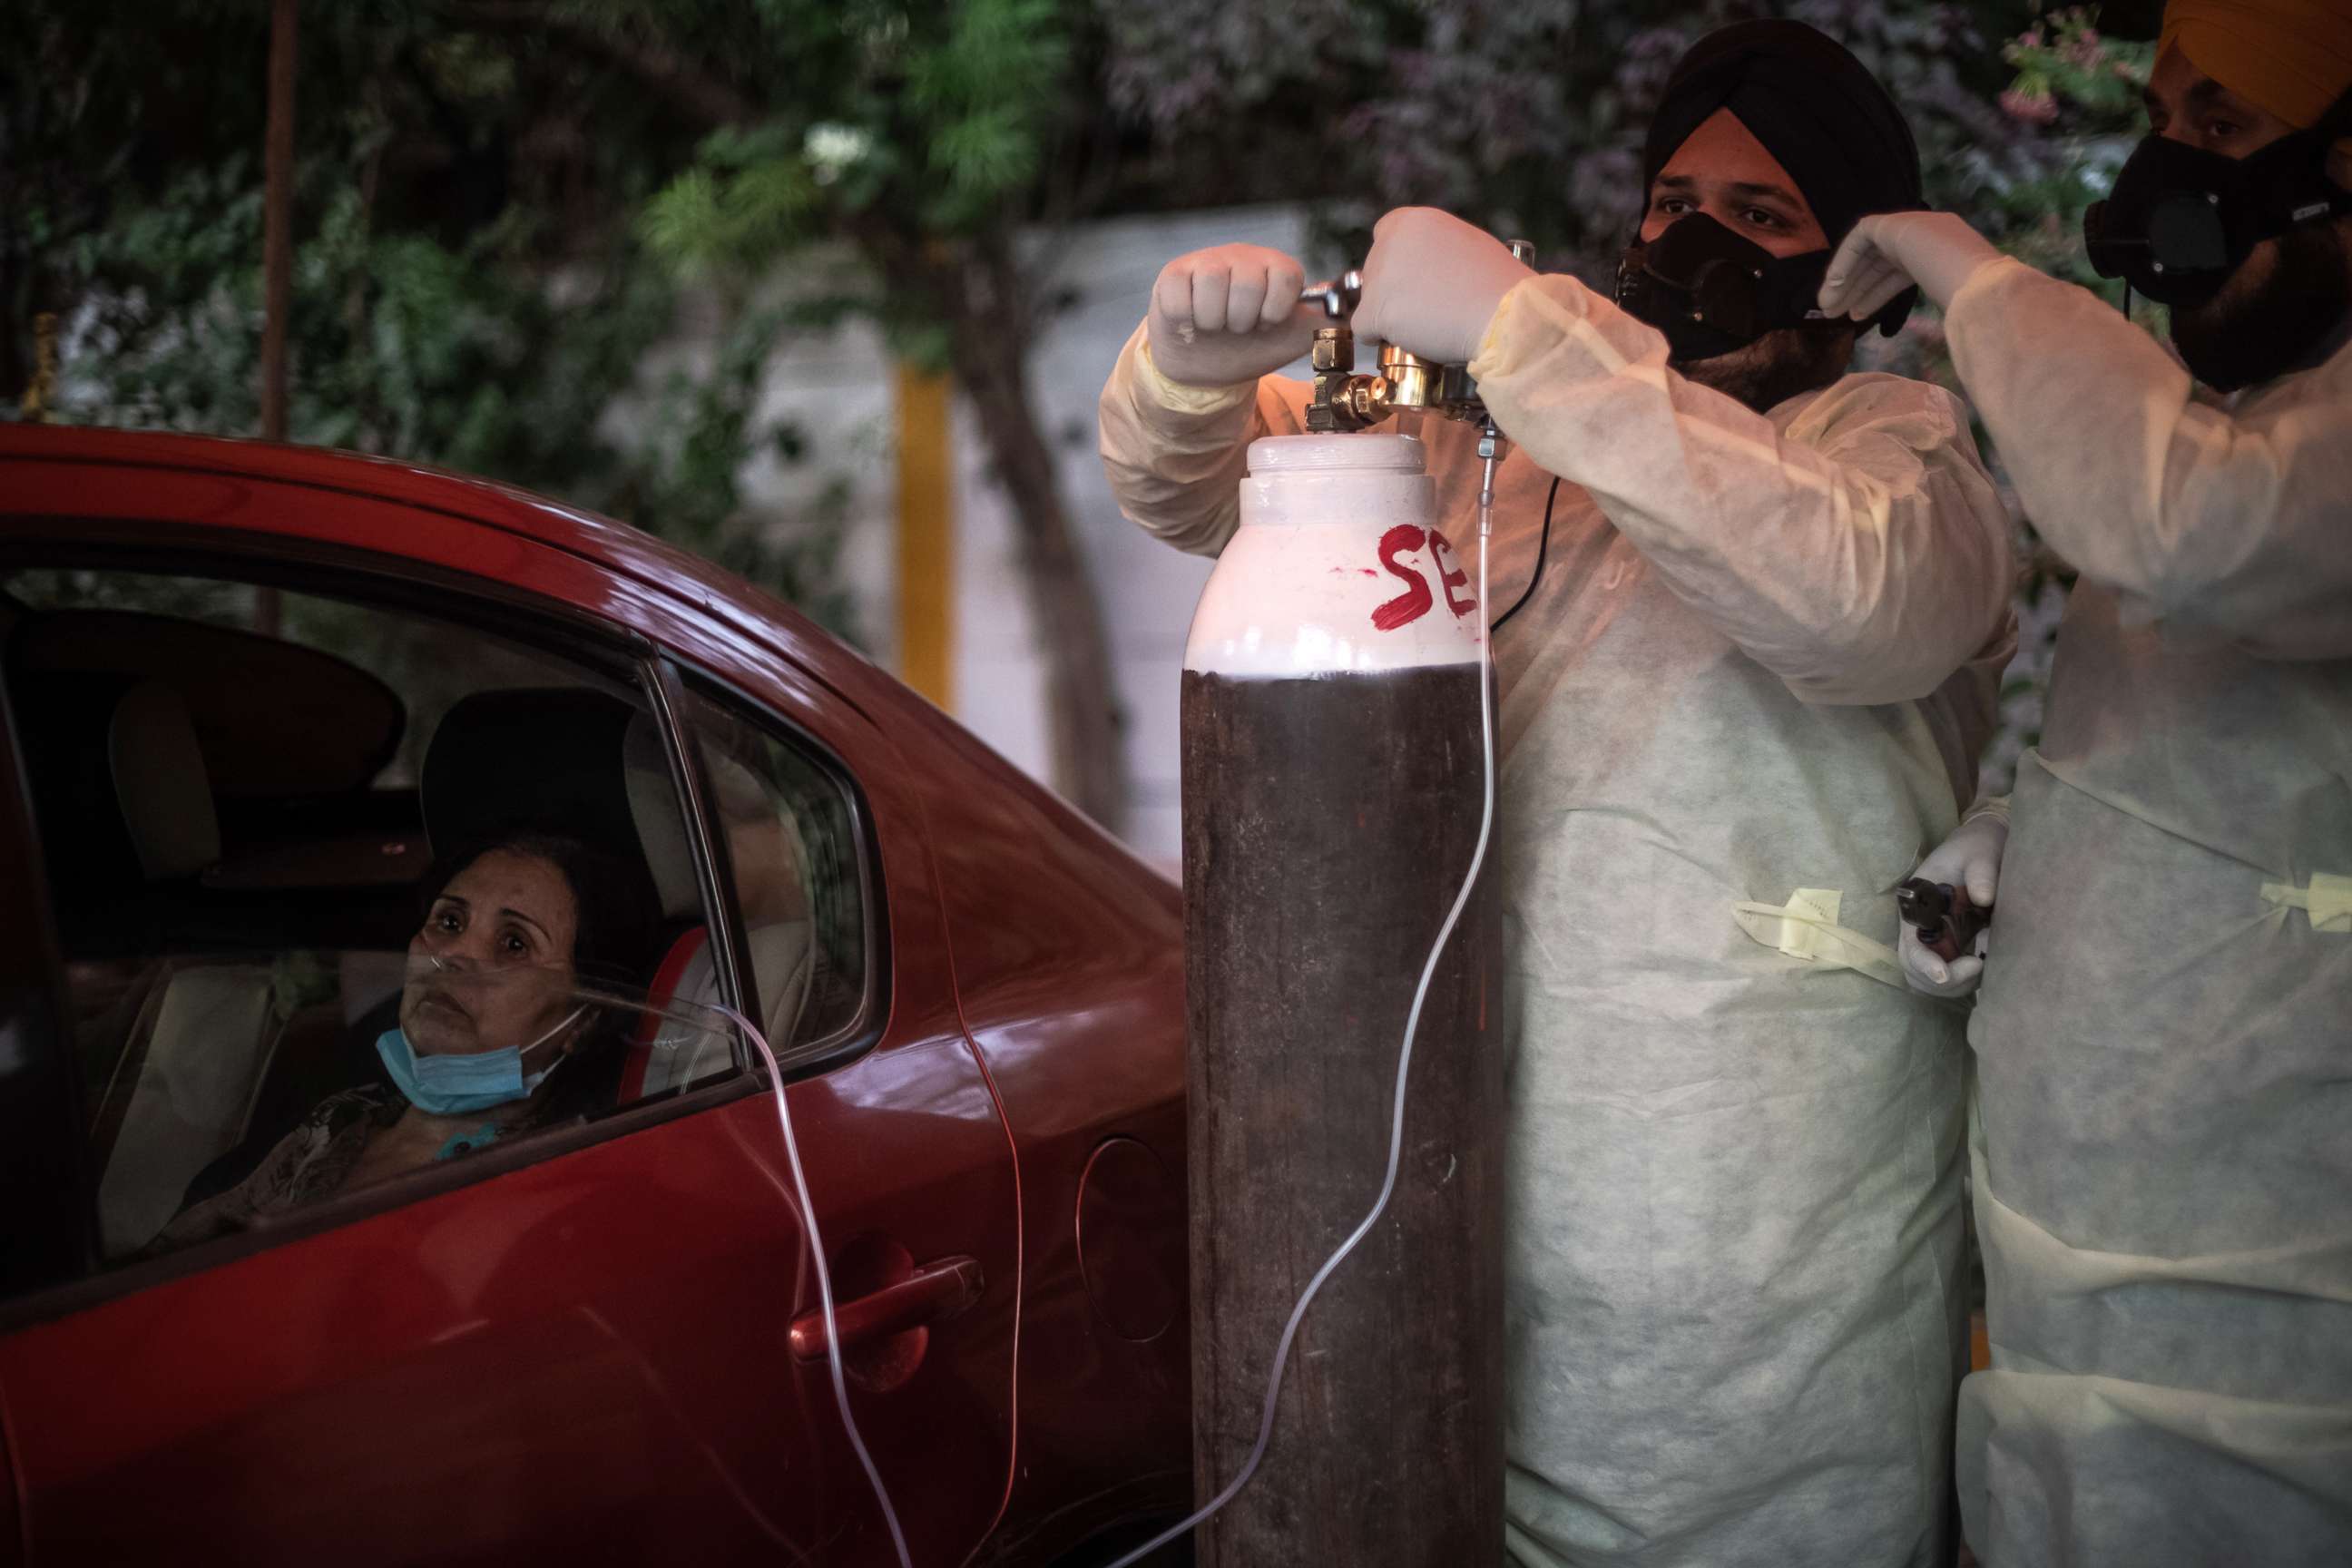 PHOTO: Volunteers treat patients suffering from COVID-19 with free oxygen at a makeshift clinic in a parking lot outside the Gurdwara Damdama Sahib, May 3, 2021, in New Delhi.